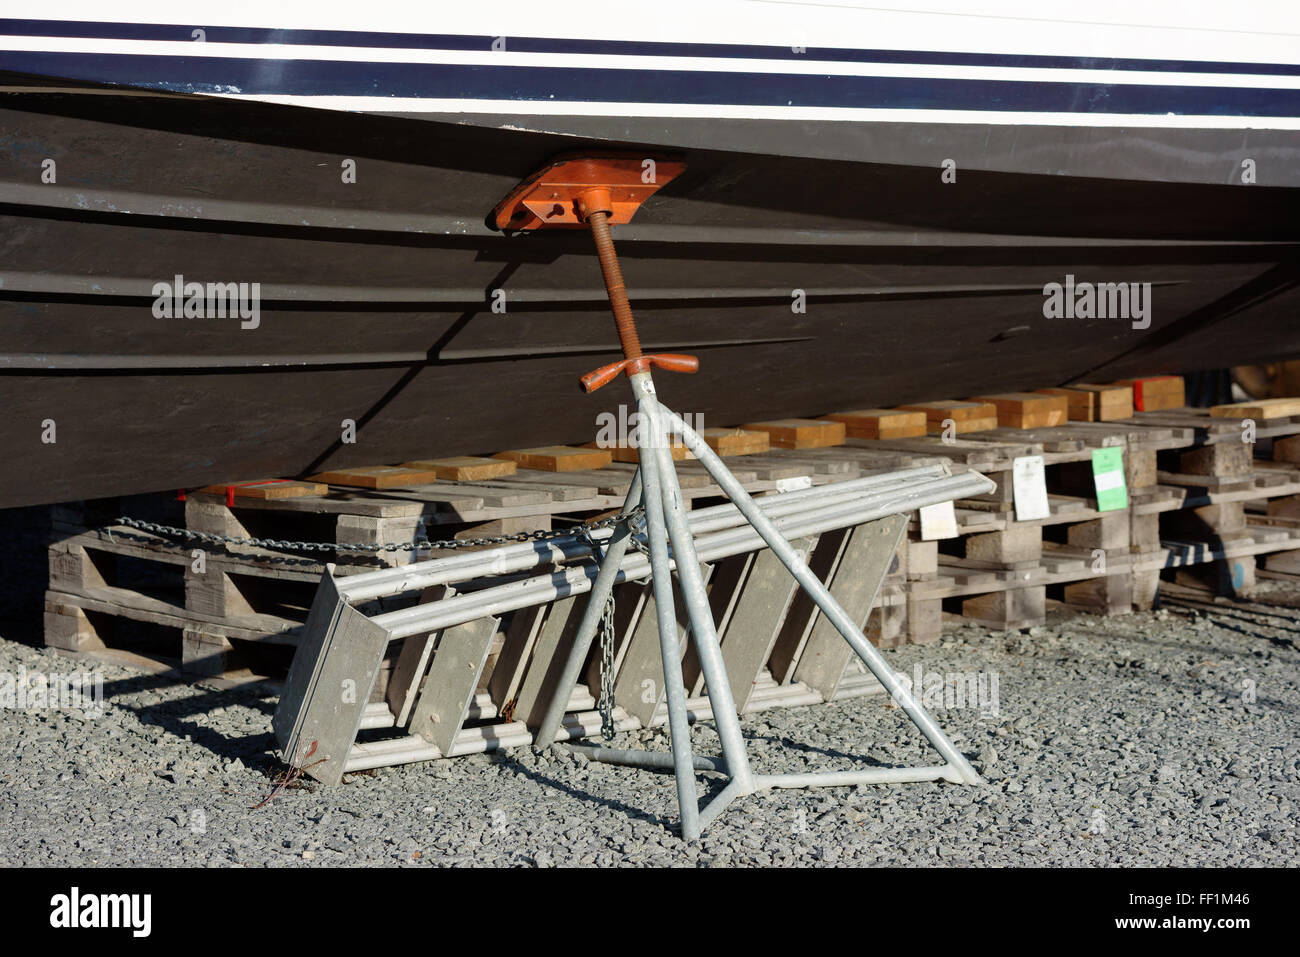 An adjustable, tilting metal boat stand support the keel from the side. The underside of the keel rests on pallets. Chain and pa Stock Photo